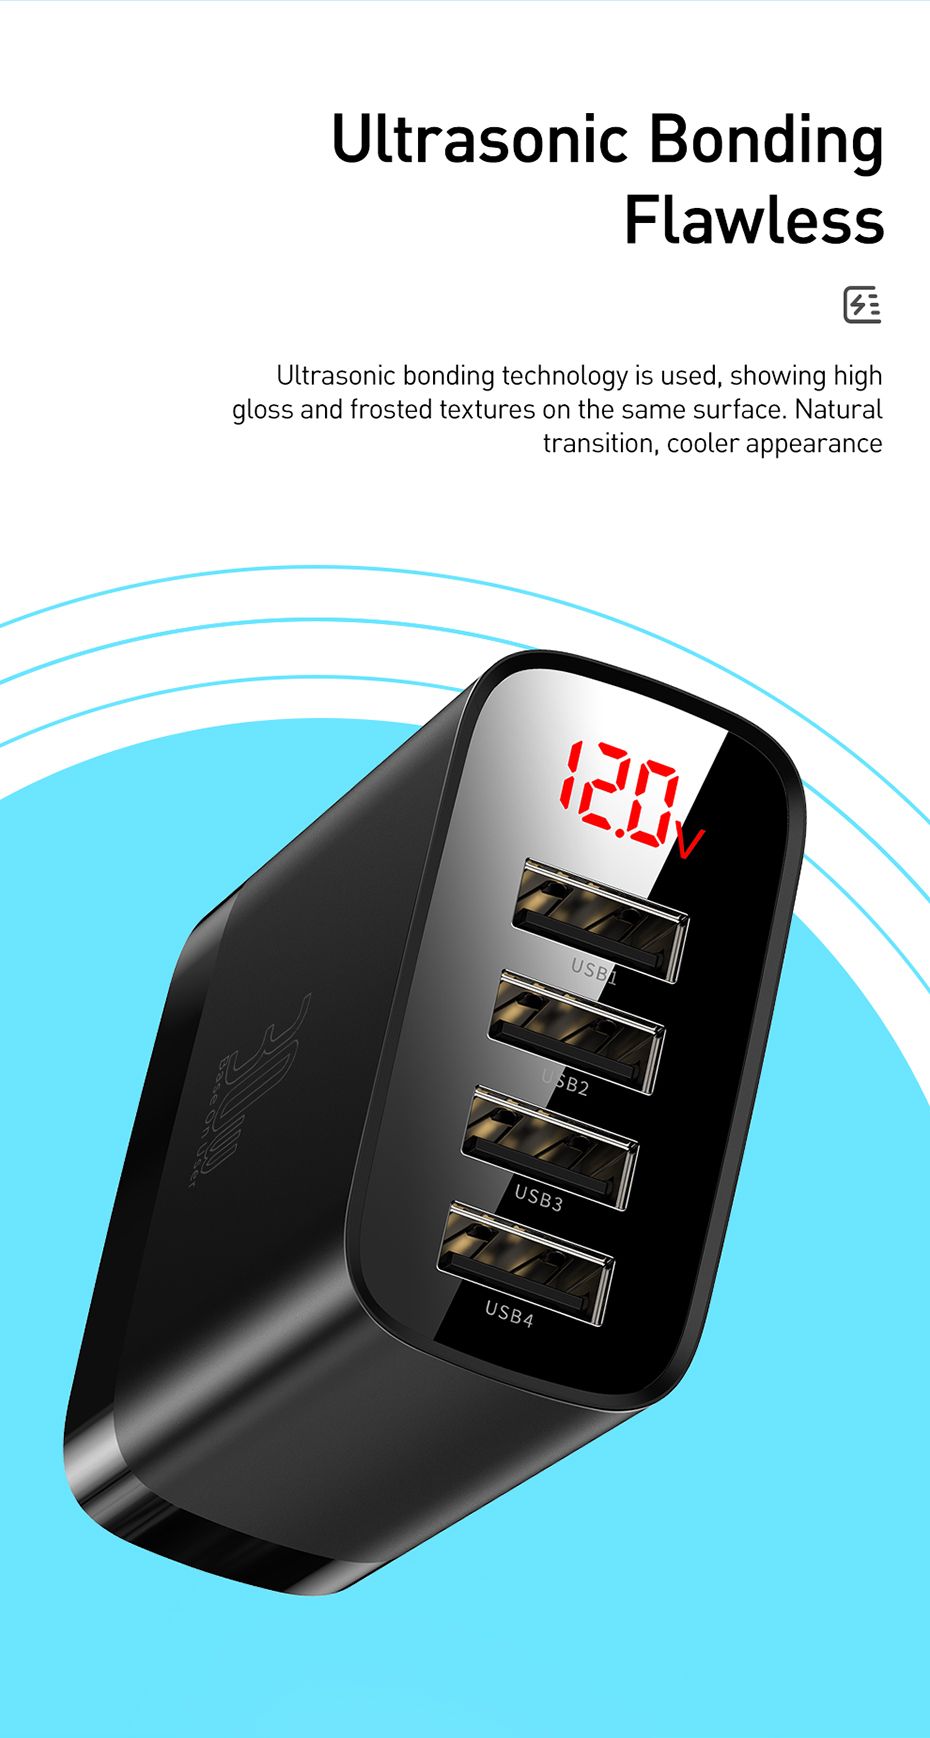 Baseus-30W-6A-4-Port-USB-Charger-LED-Digital-Display-Travel-Wall-Charger-Adapter-With-Foldable-US-Pl-1639630